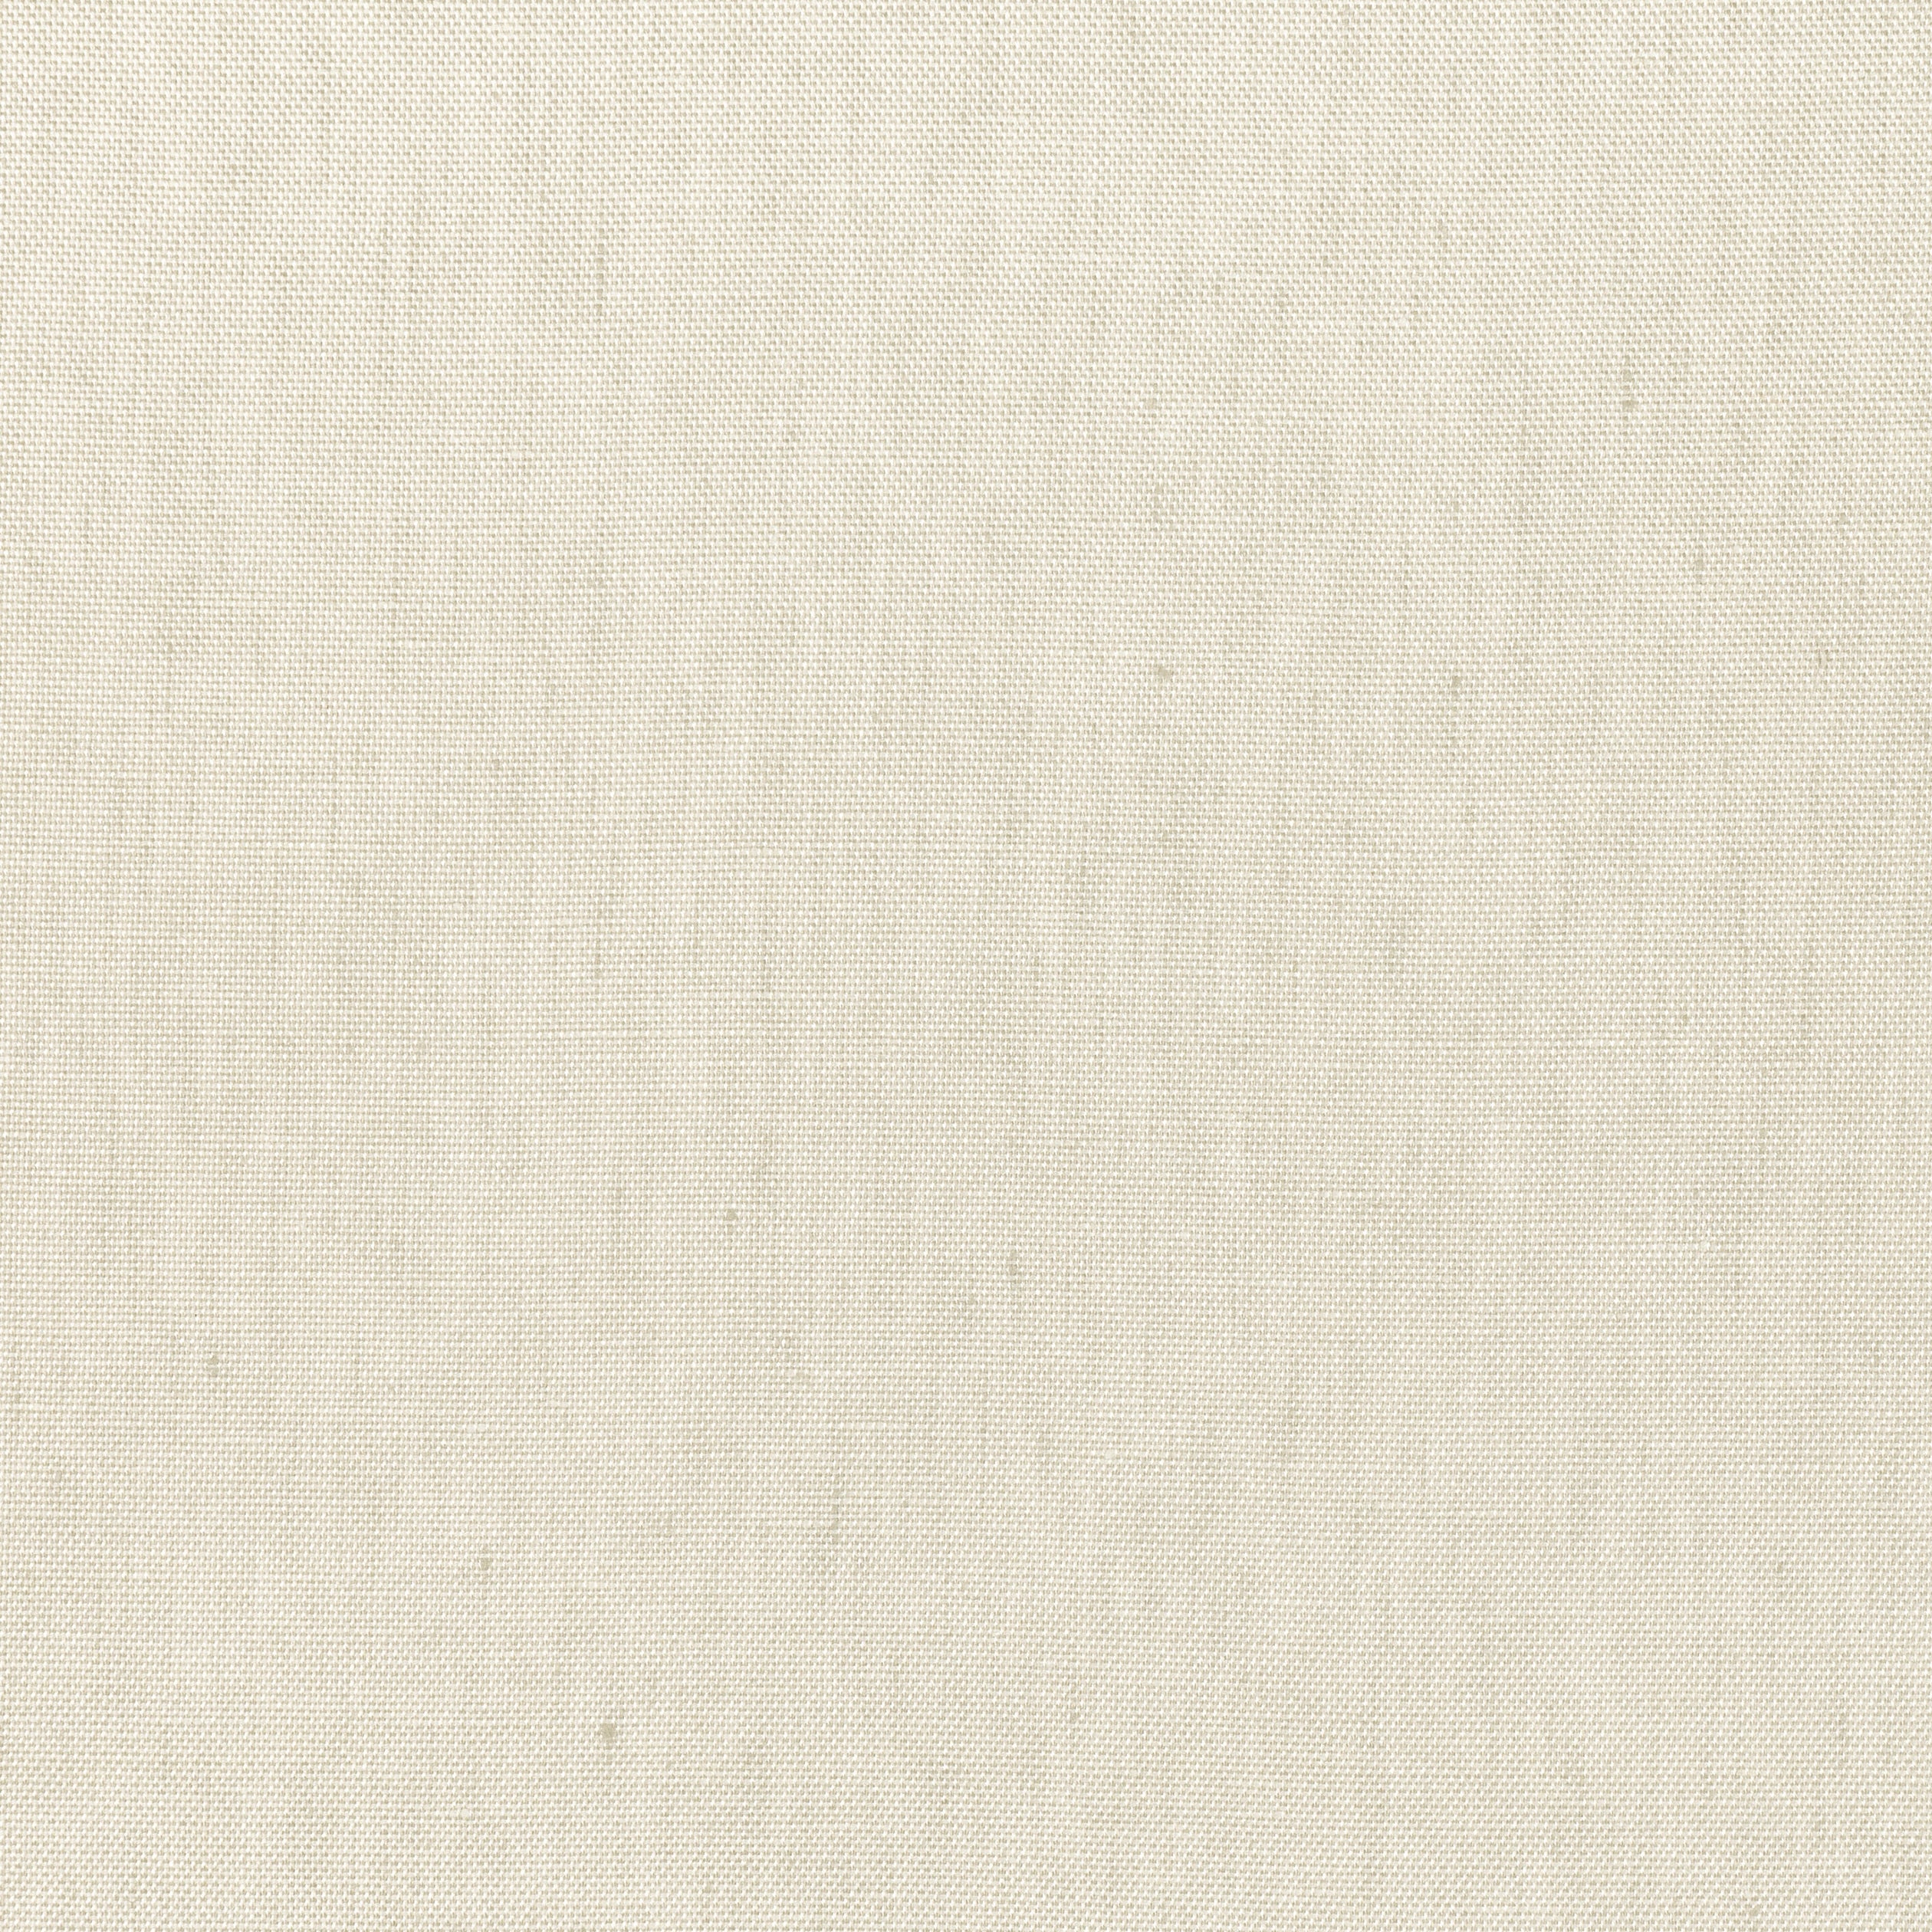 Skye Linen fabric in linen color - pattern number FWW7606 - by Thibaut in the Palisades collection